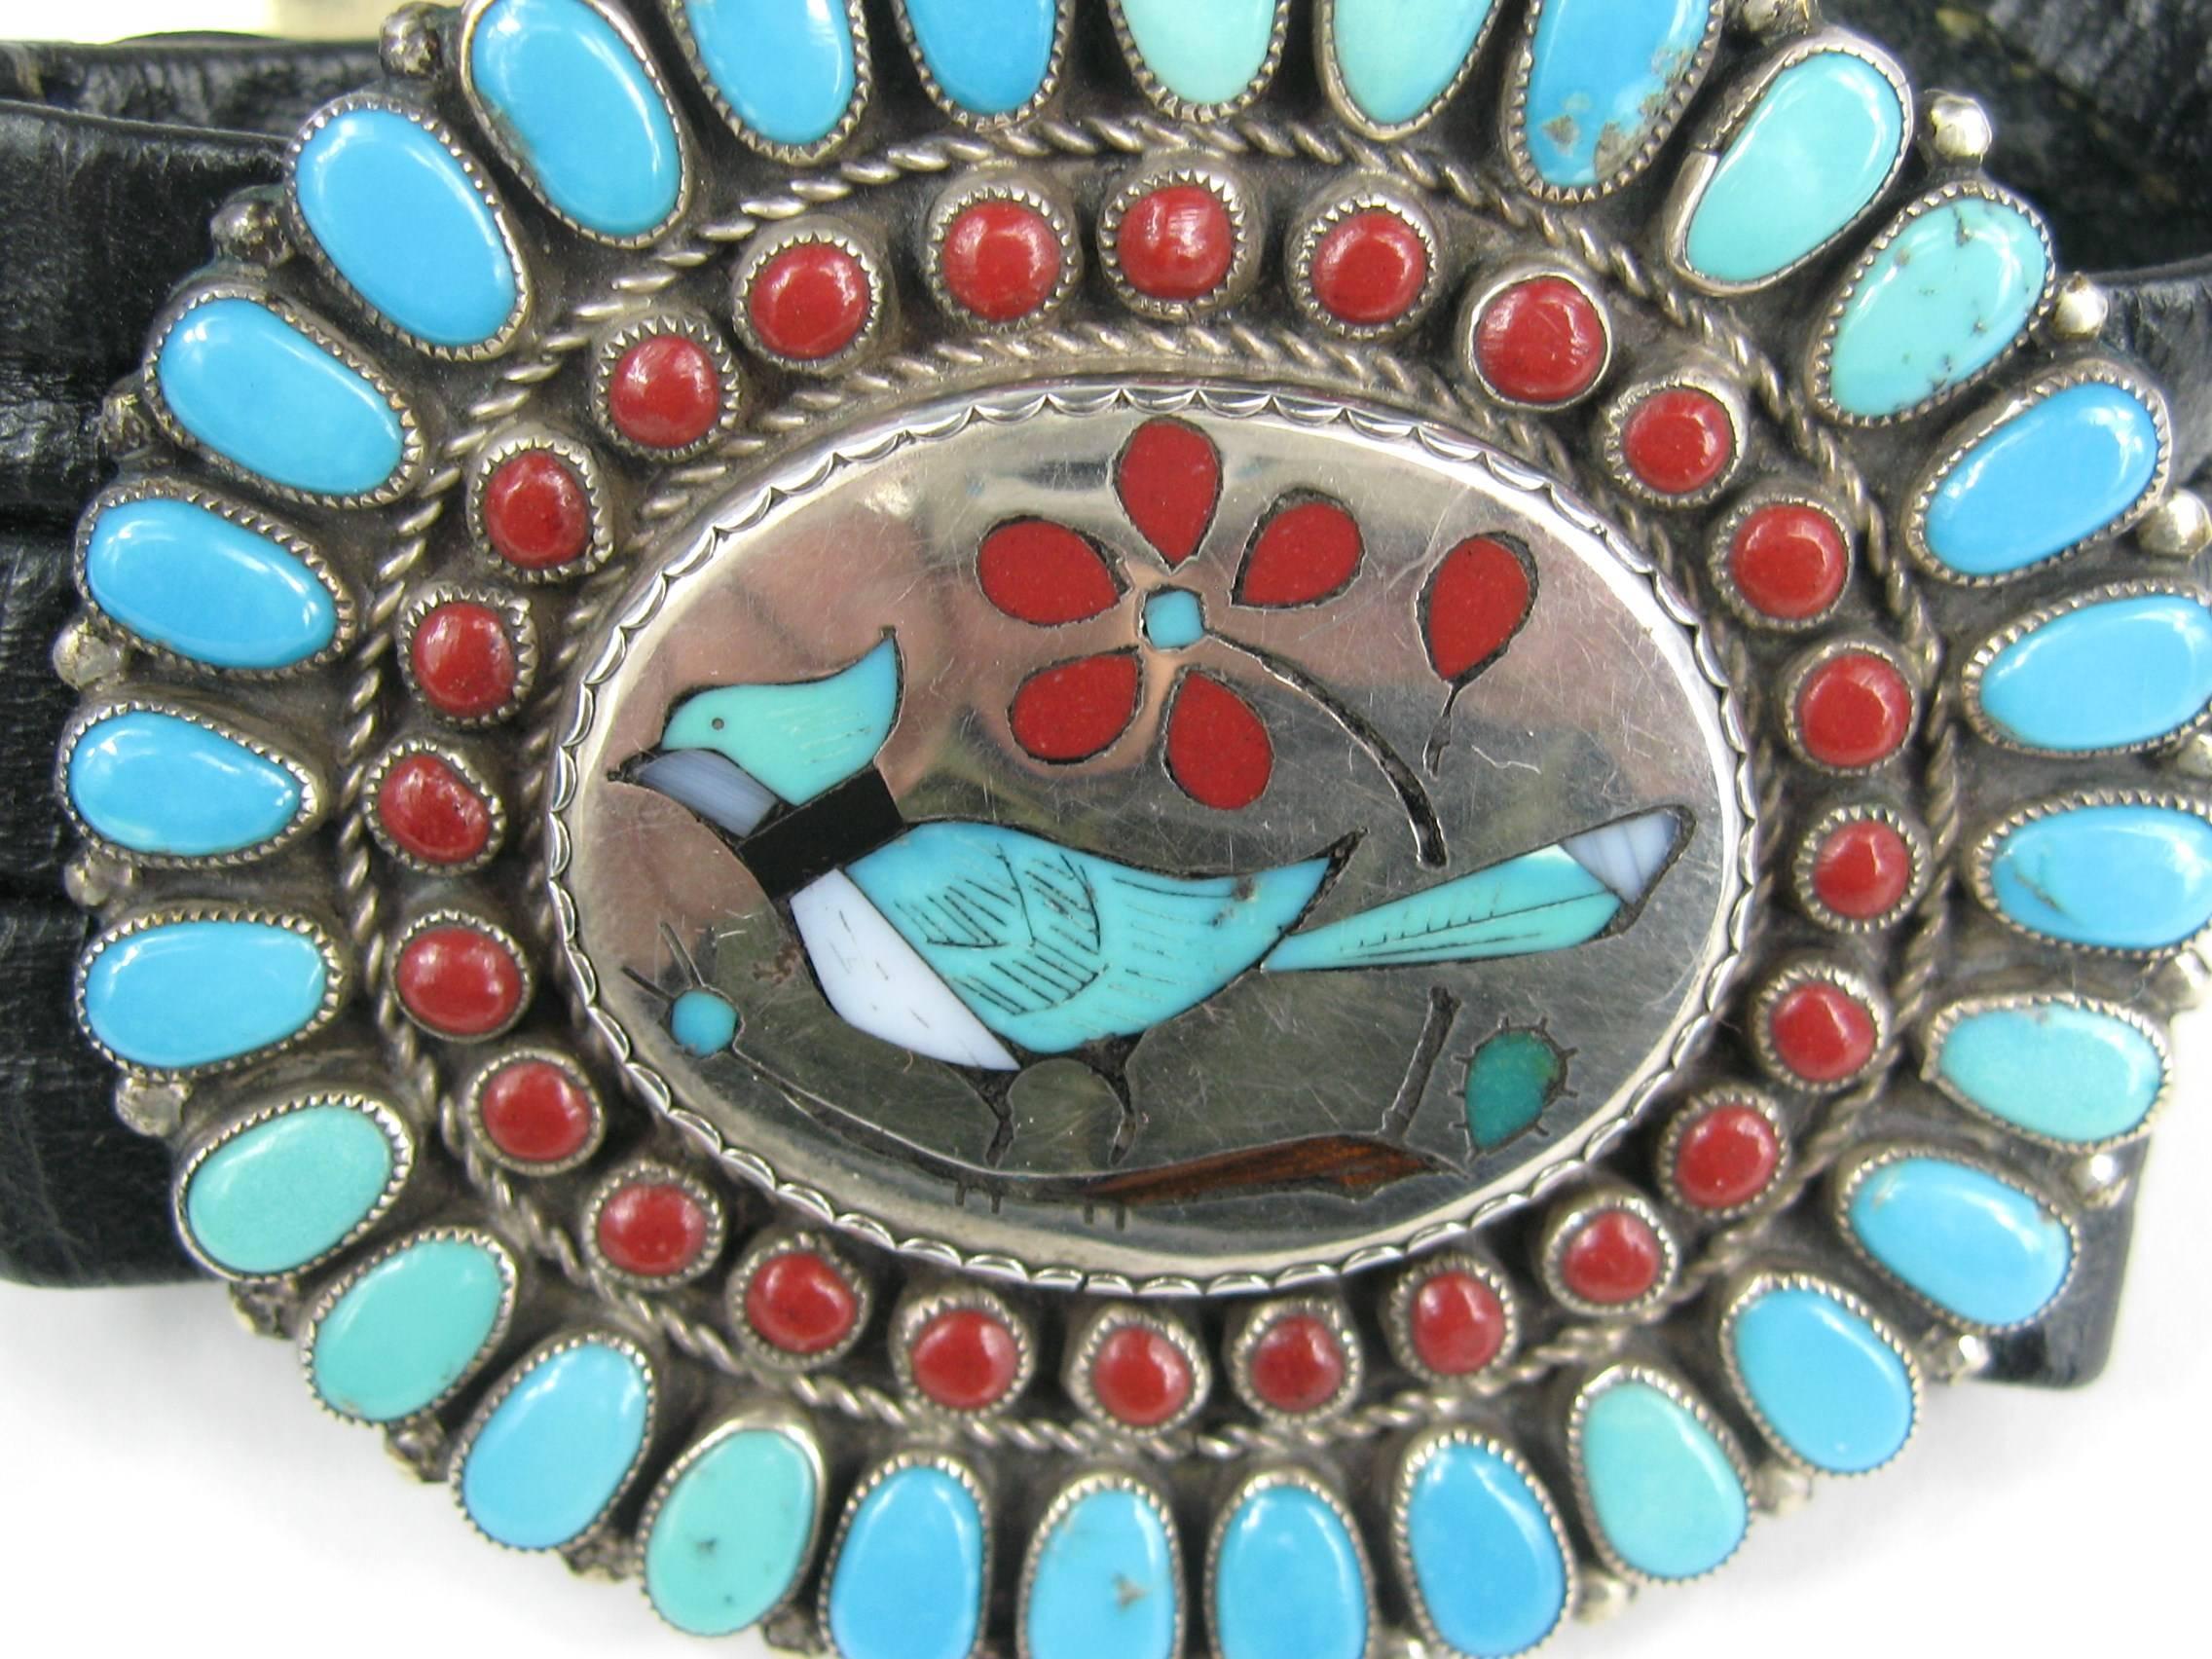 Sterling Silver concho bracelet.  L .H. Lonjose ZUNI  mother of pearl With coral, onyx, bone and turquoise by one of the renowned Lonjose family of Zuni Pueblo, N.M. Measures  Wide.2.58 x 2.86 . This is on a hand made leather strap with buckle on